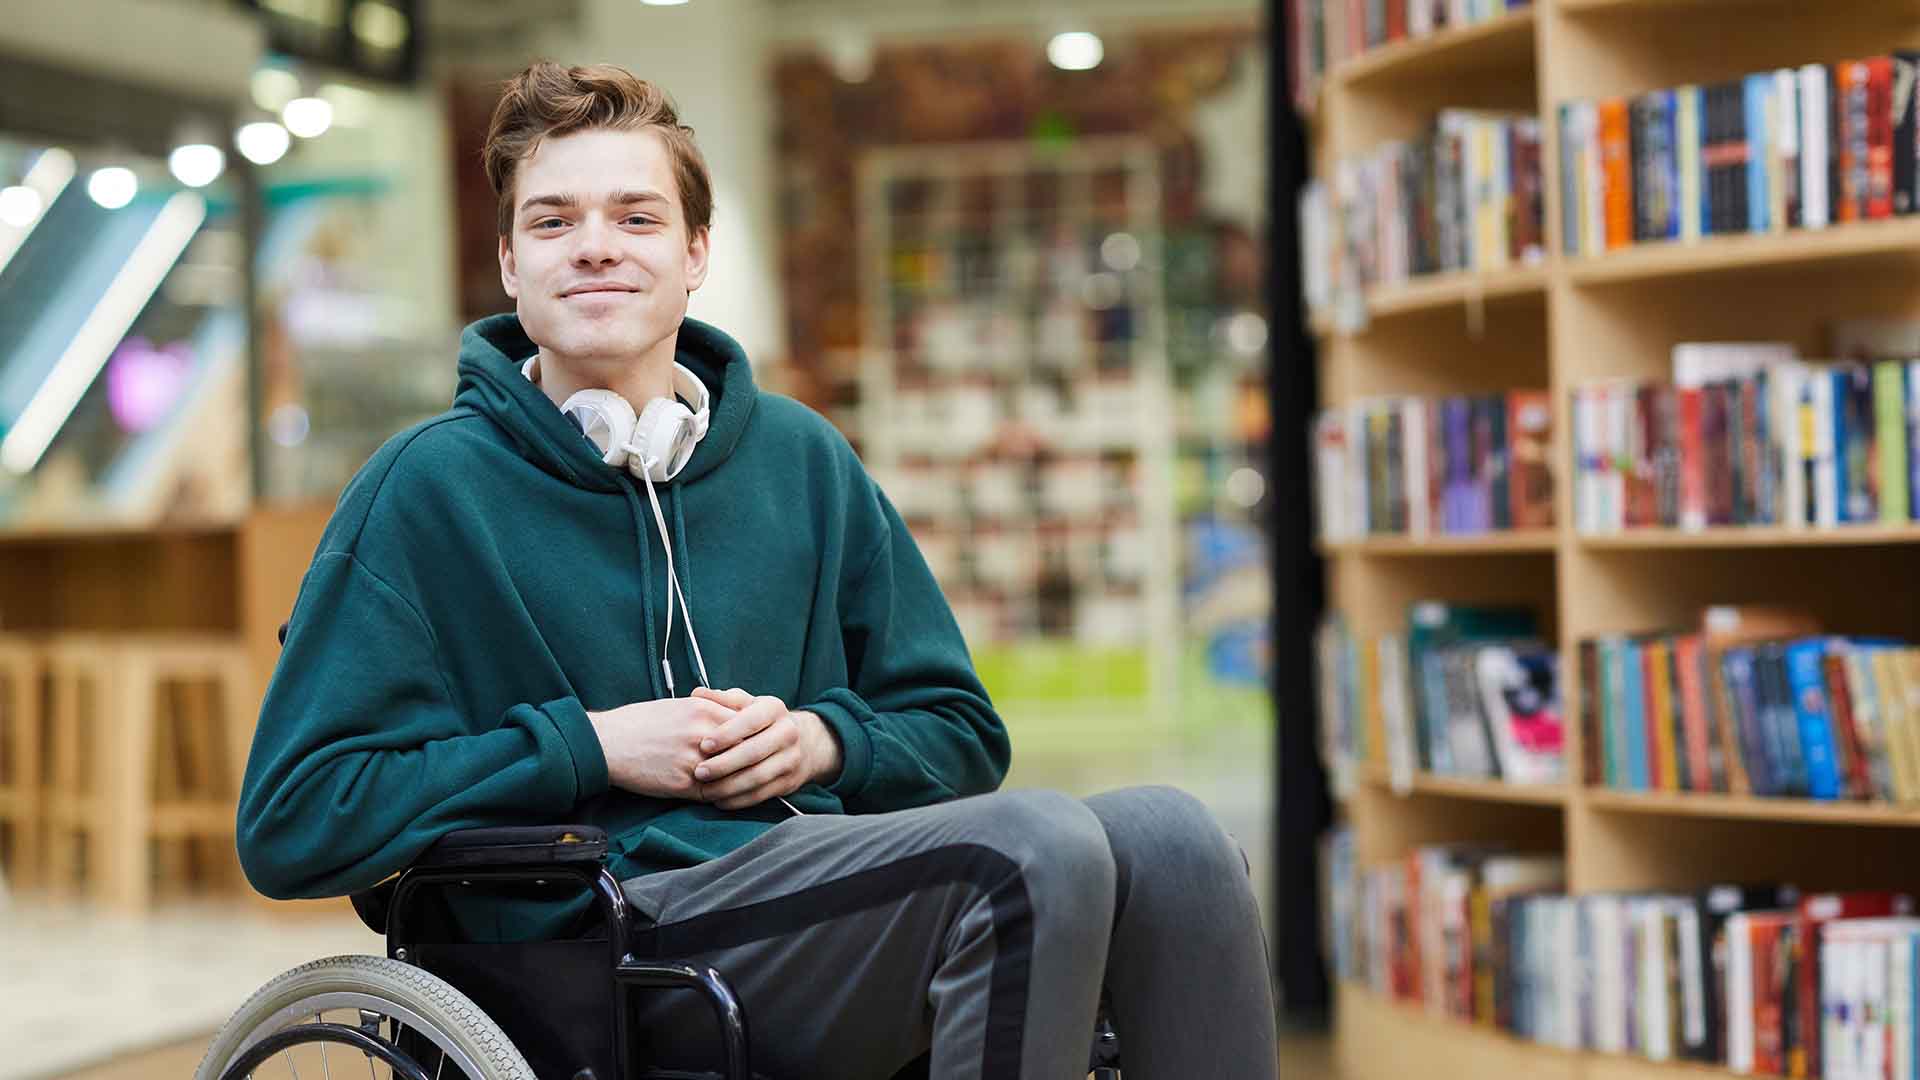 Disability support web